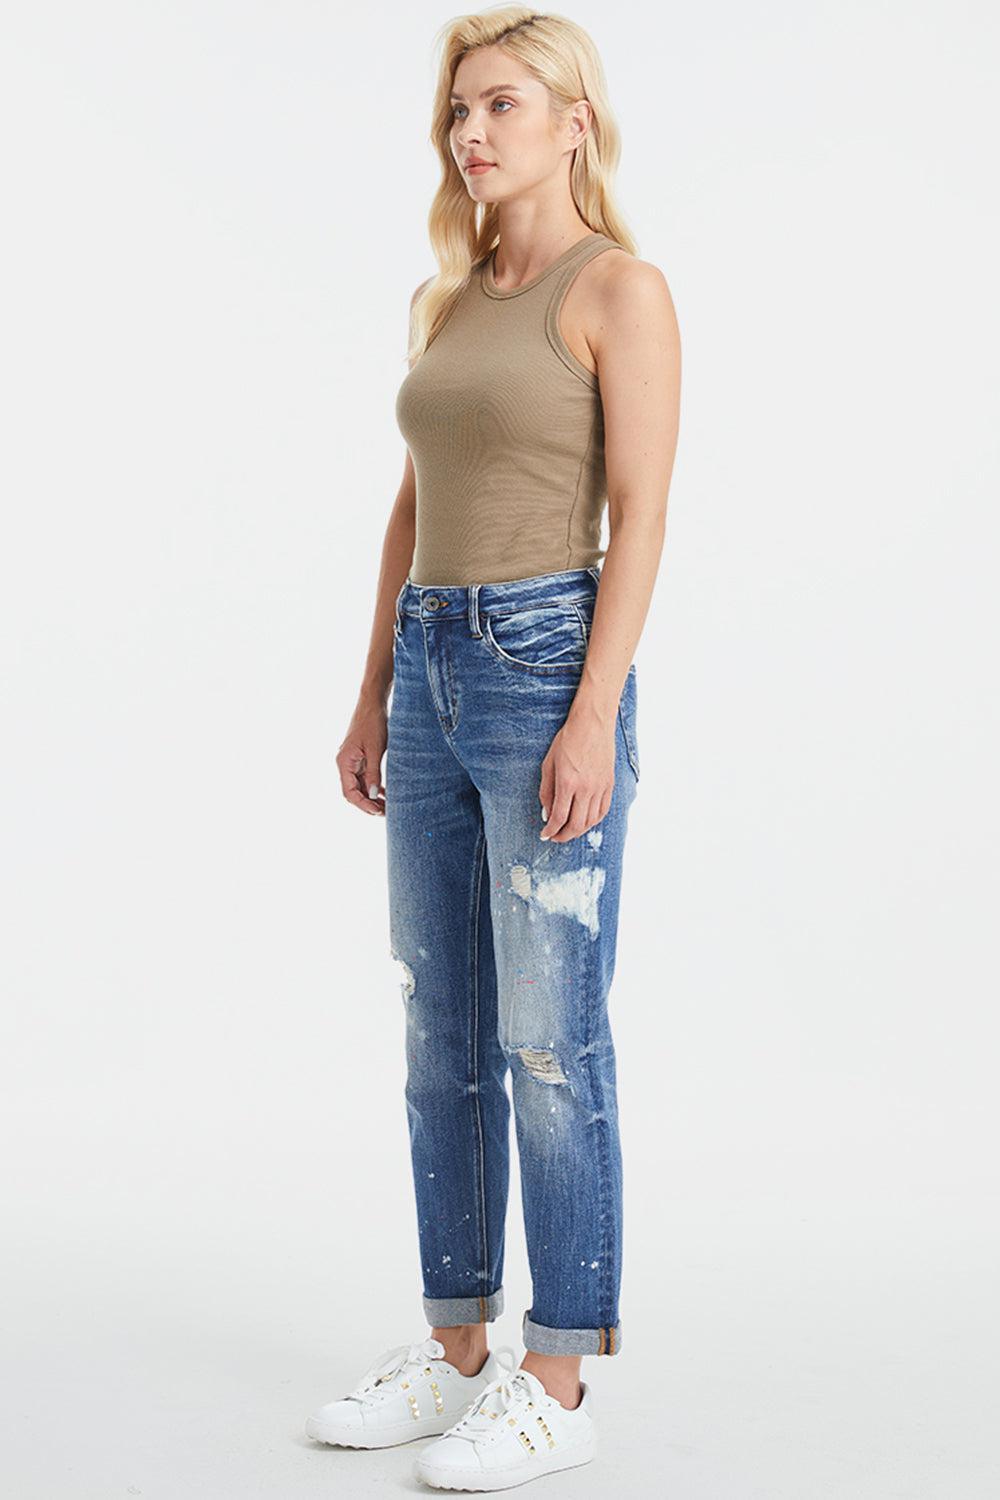 a woman in a tank top and ripped jeans